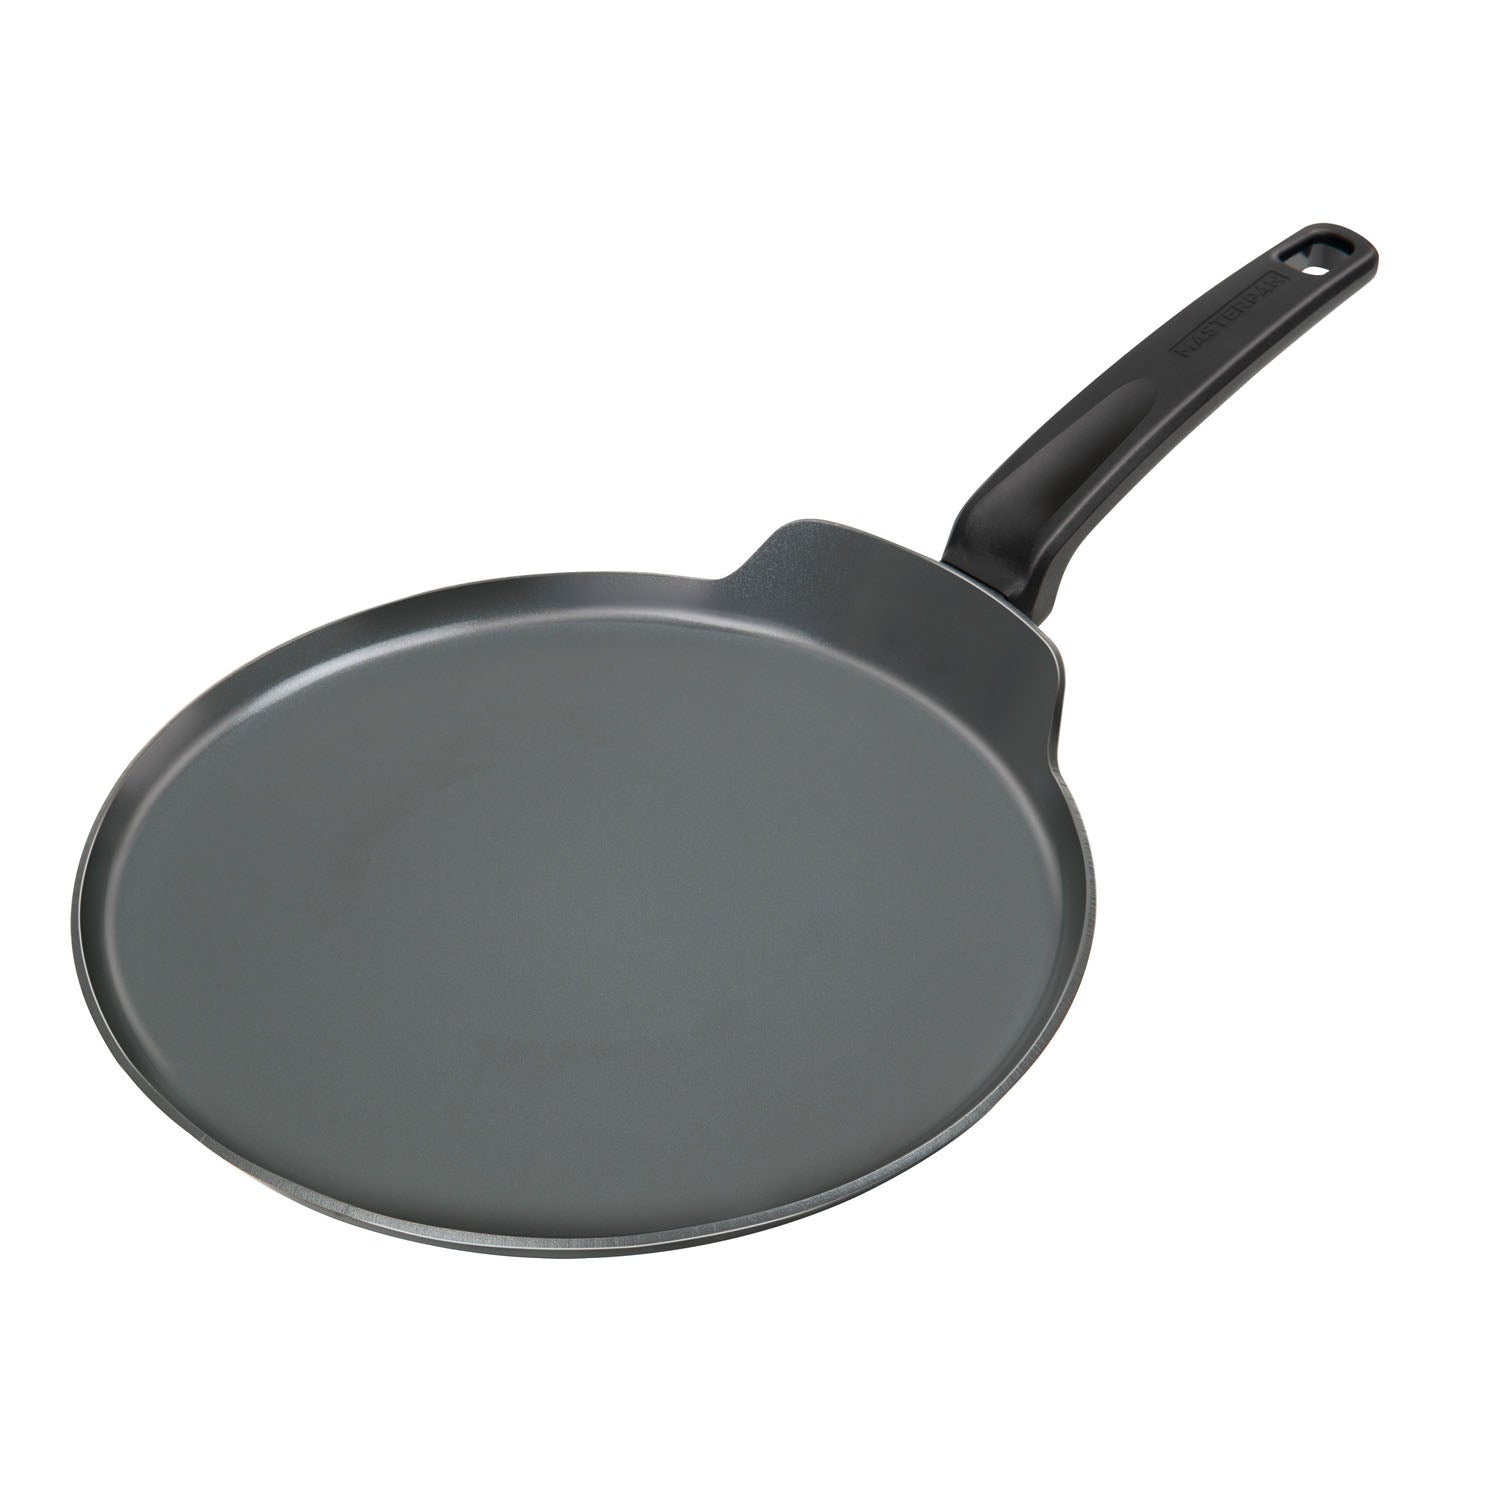 MASTERPAN Ceramic Nonstick Crepe Pan & Griddle with Silicone Grip, 11